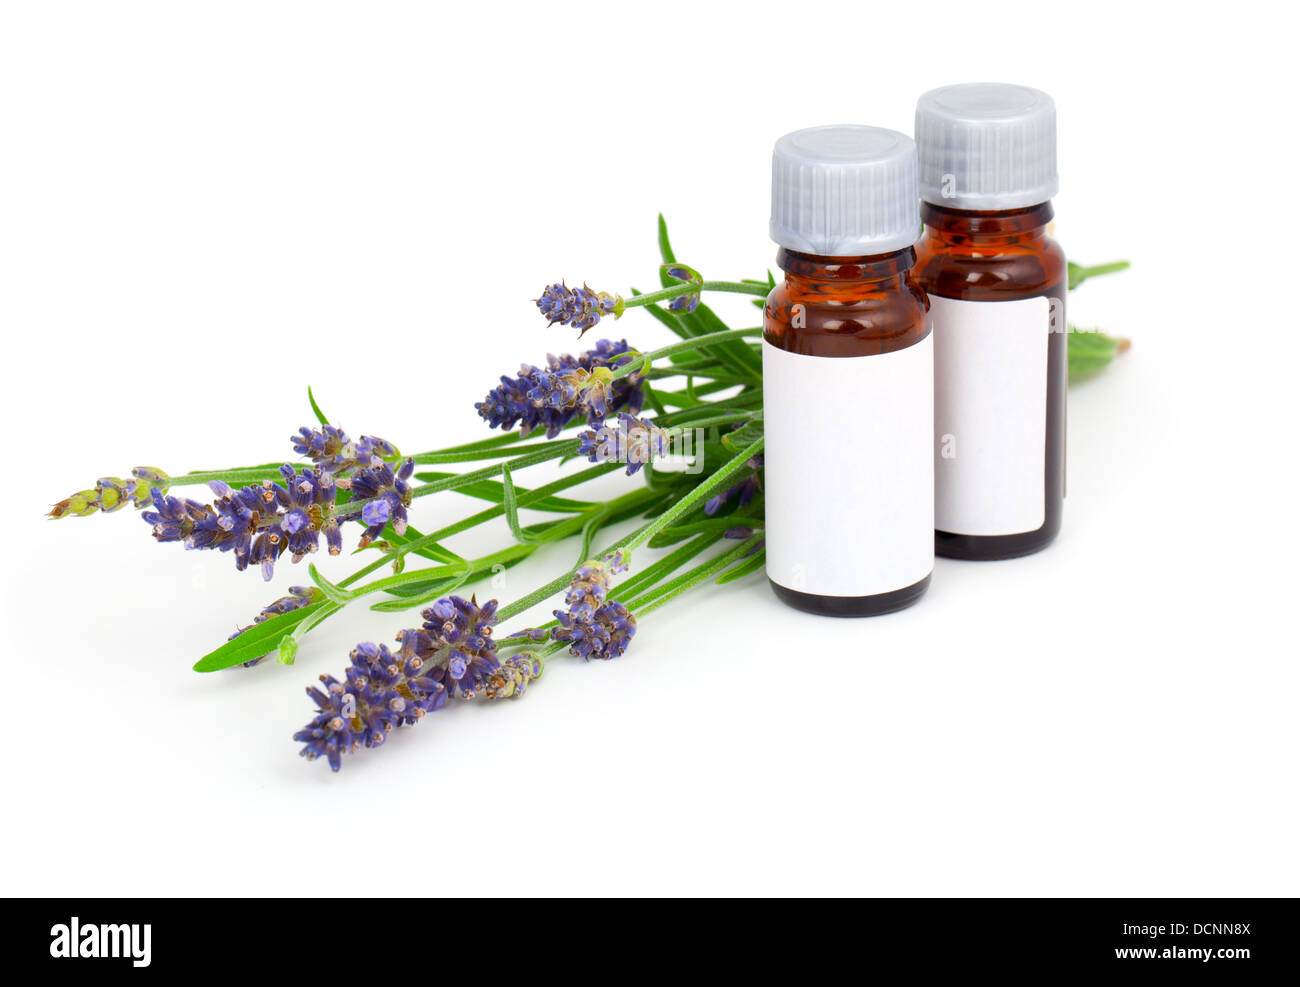 Aromatherapy Lavender oil and lavender flower, isolated on white Stock Photo